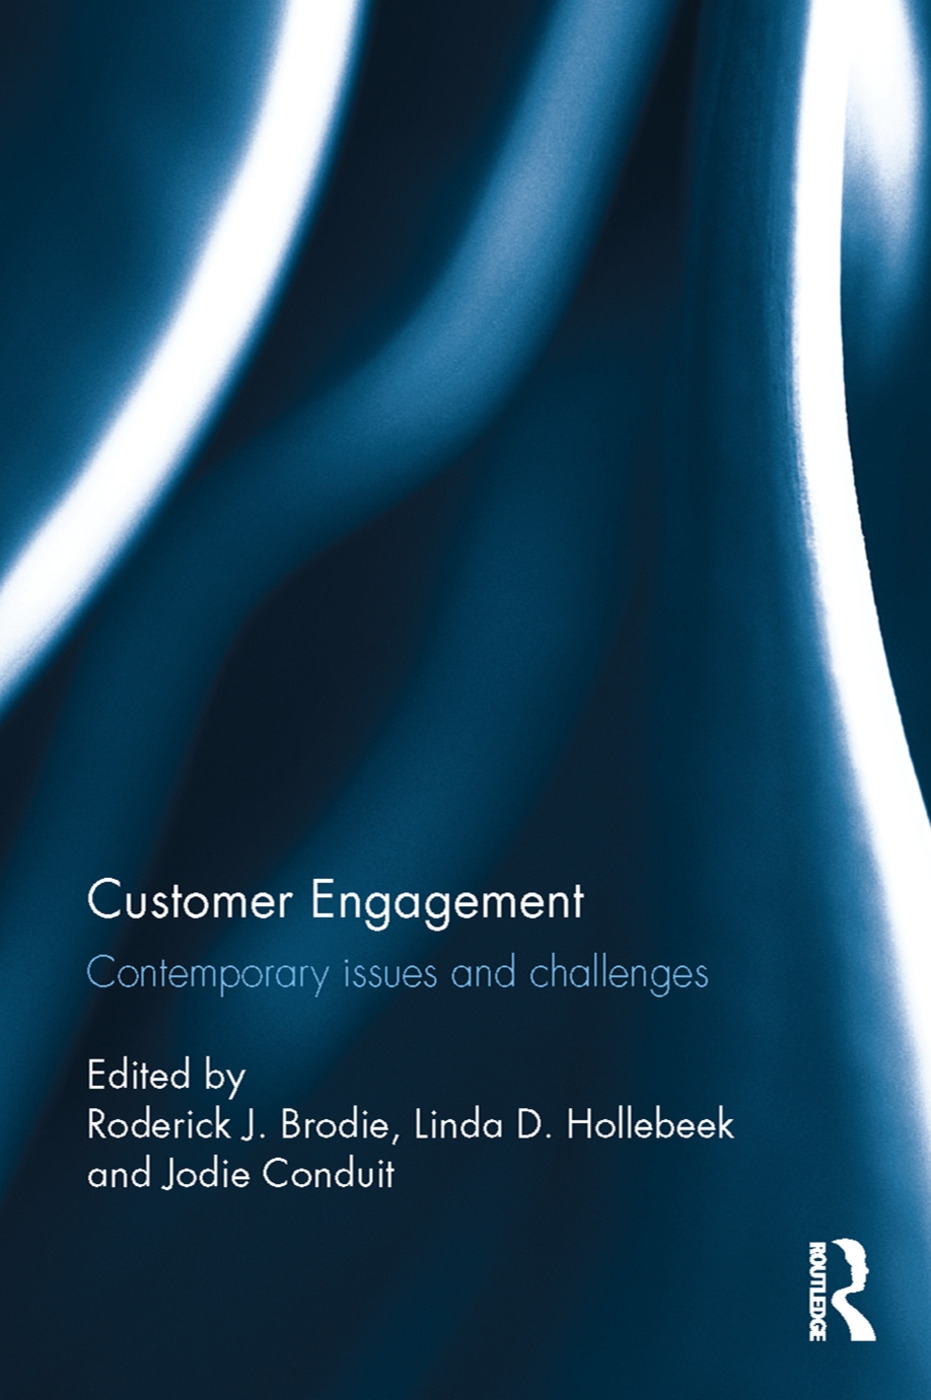 Customer Engagement: Contemporary Issues and Challenges